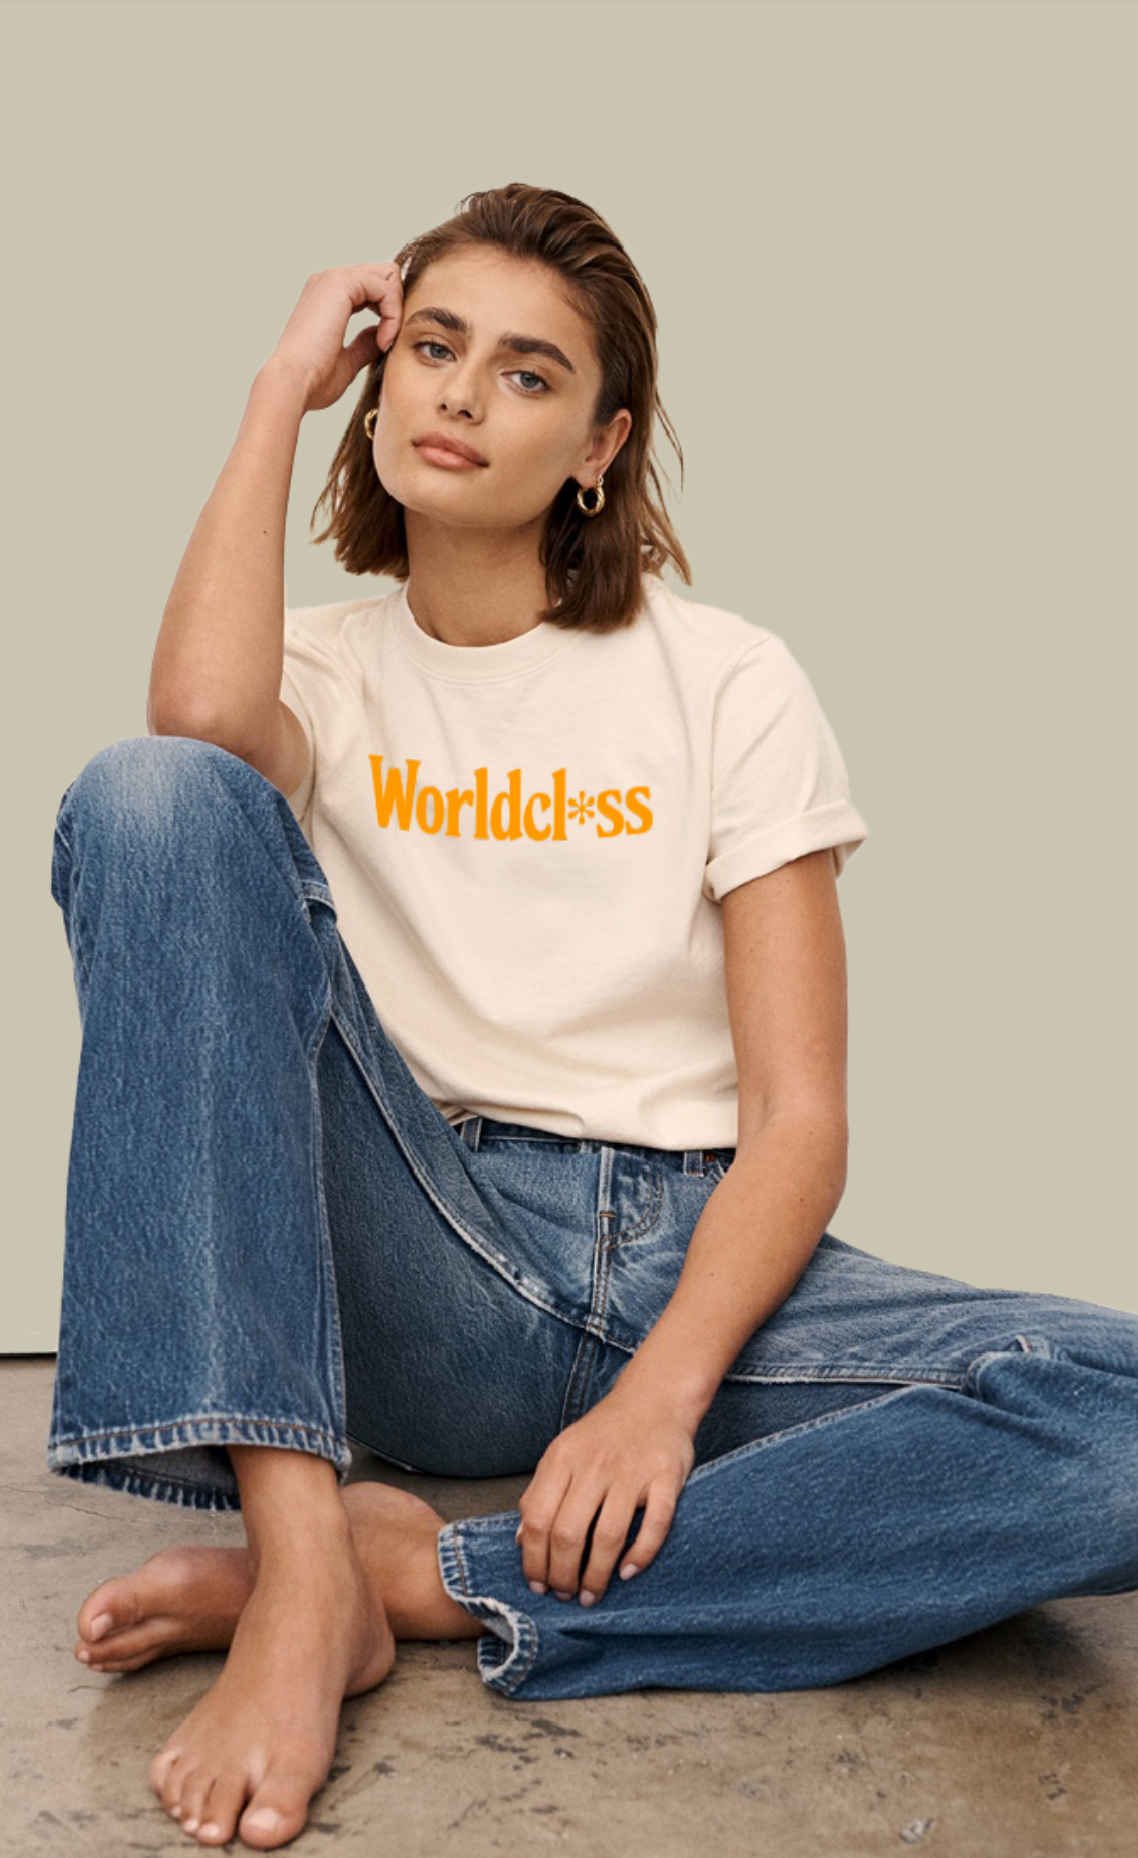 a woman is sitting on the floor wearing a t-shirt and jeans .